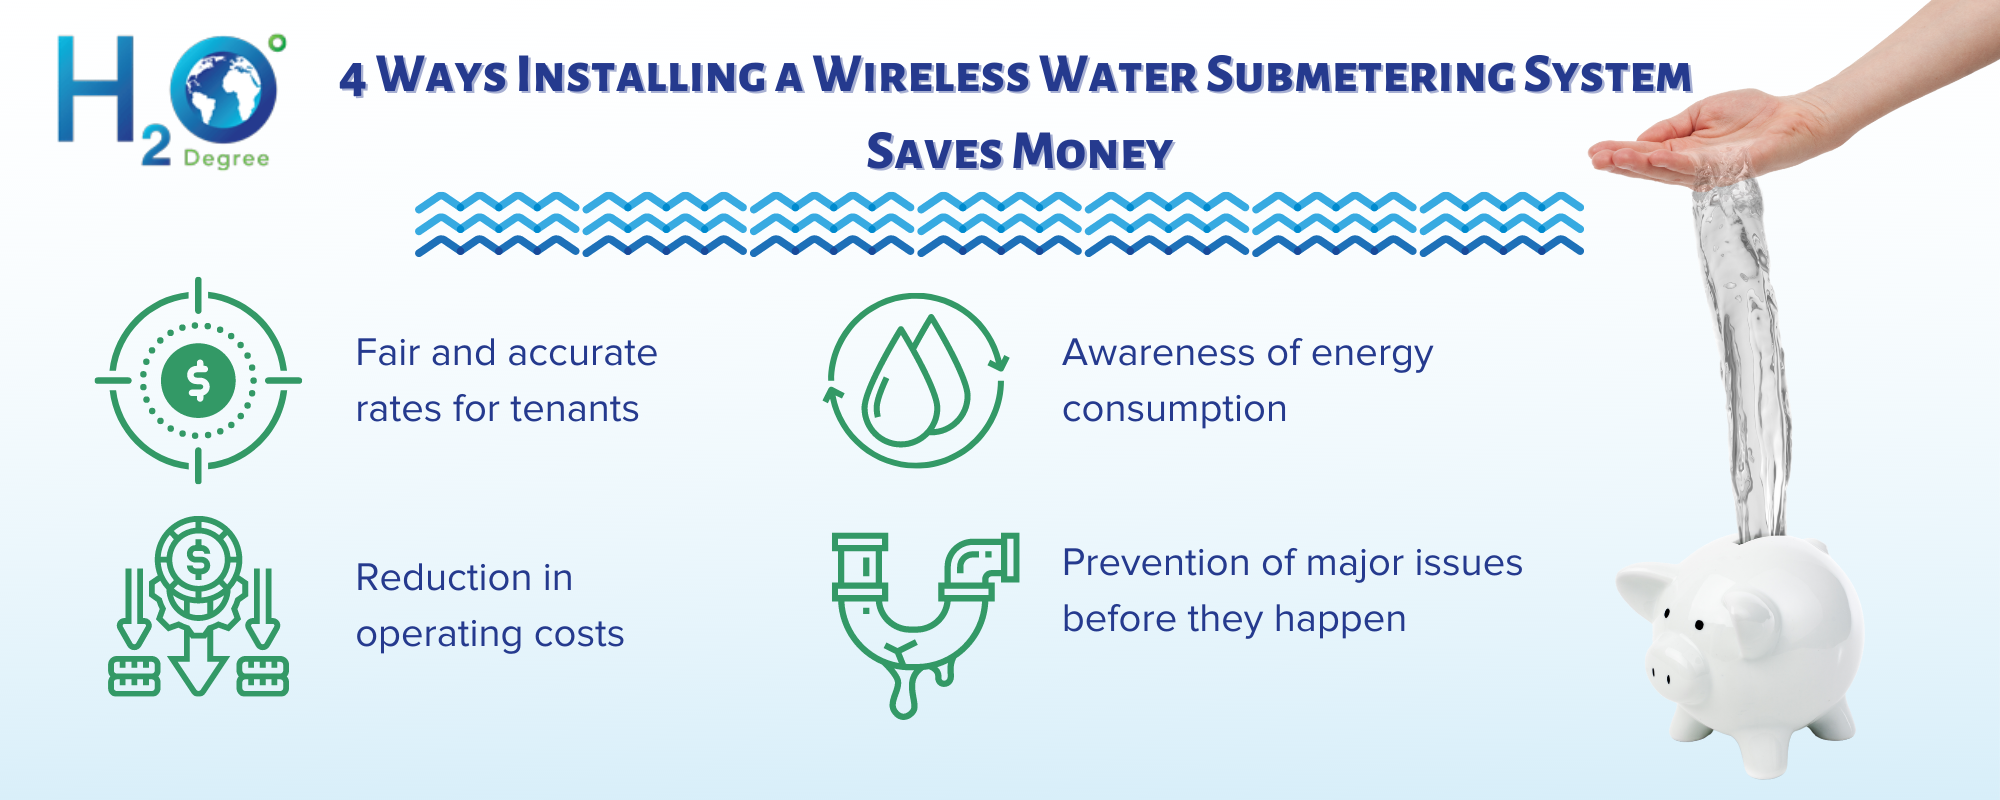 Infographic explaining how wireless water submetering systems can save money for building owners and tenants